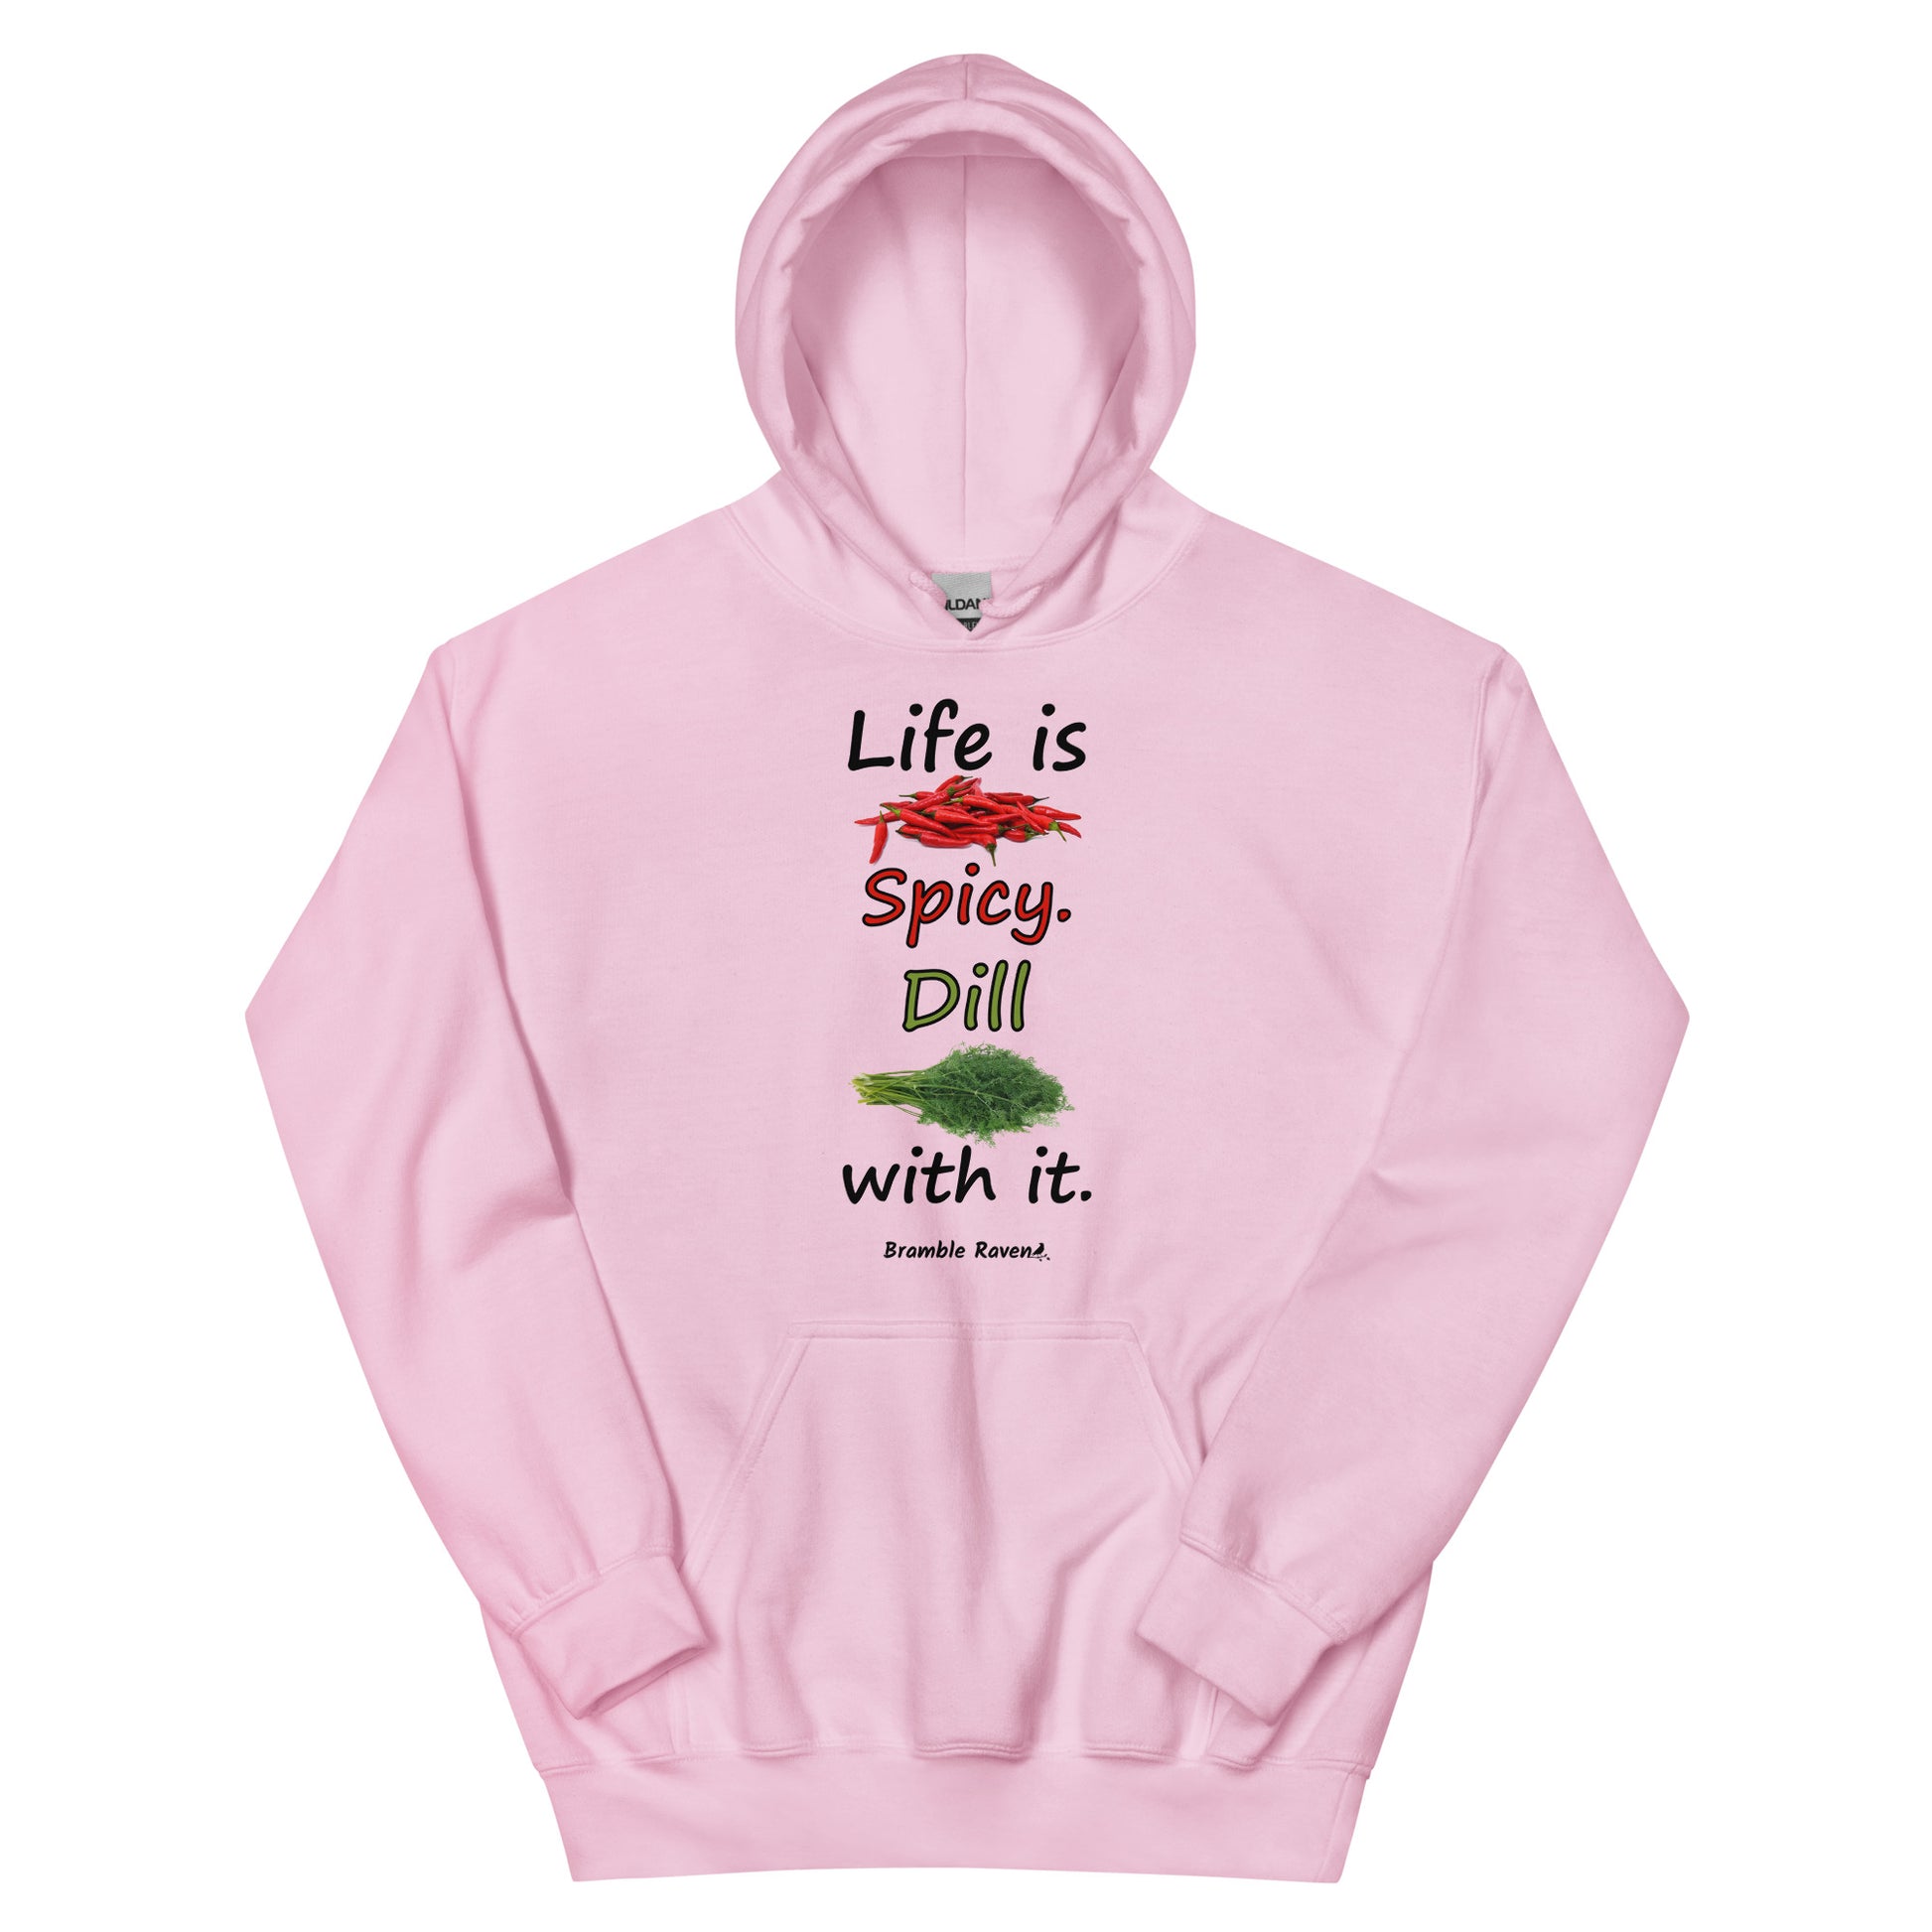 Light pink colored unisex heavy blend hoodie.  Double lined hood, matching drawcord, front pouch pocket. Rib knit cuffs and waistband. Features text and image: Life is spicy. Dill with it. 